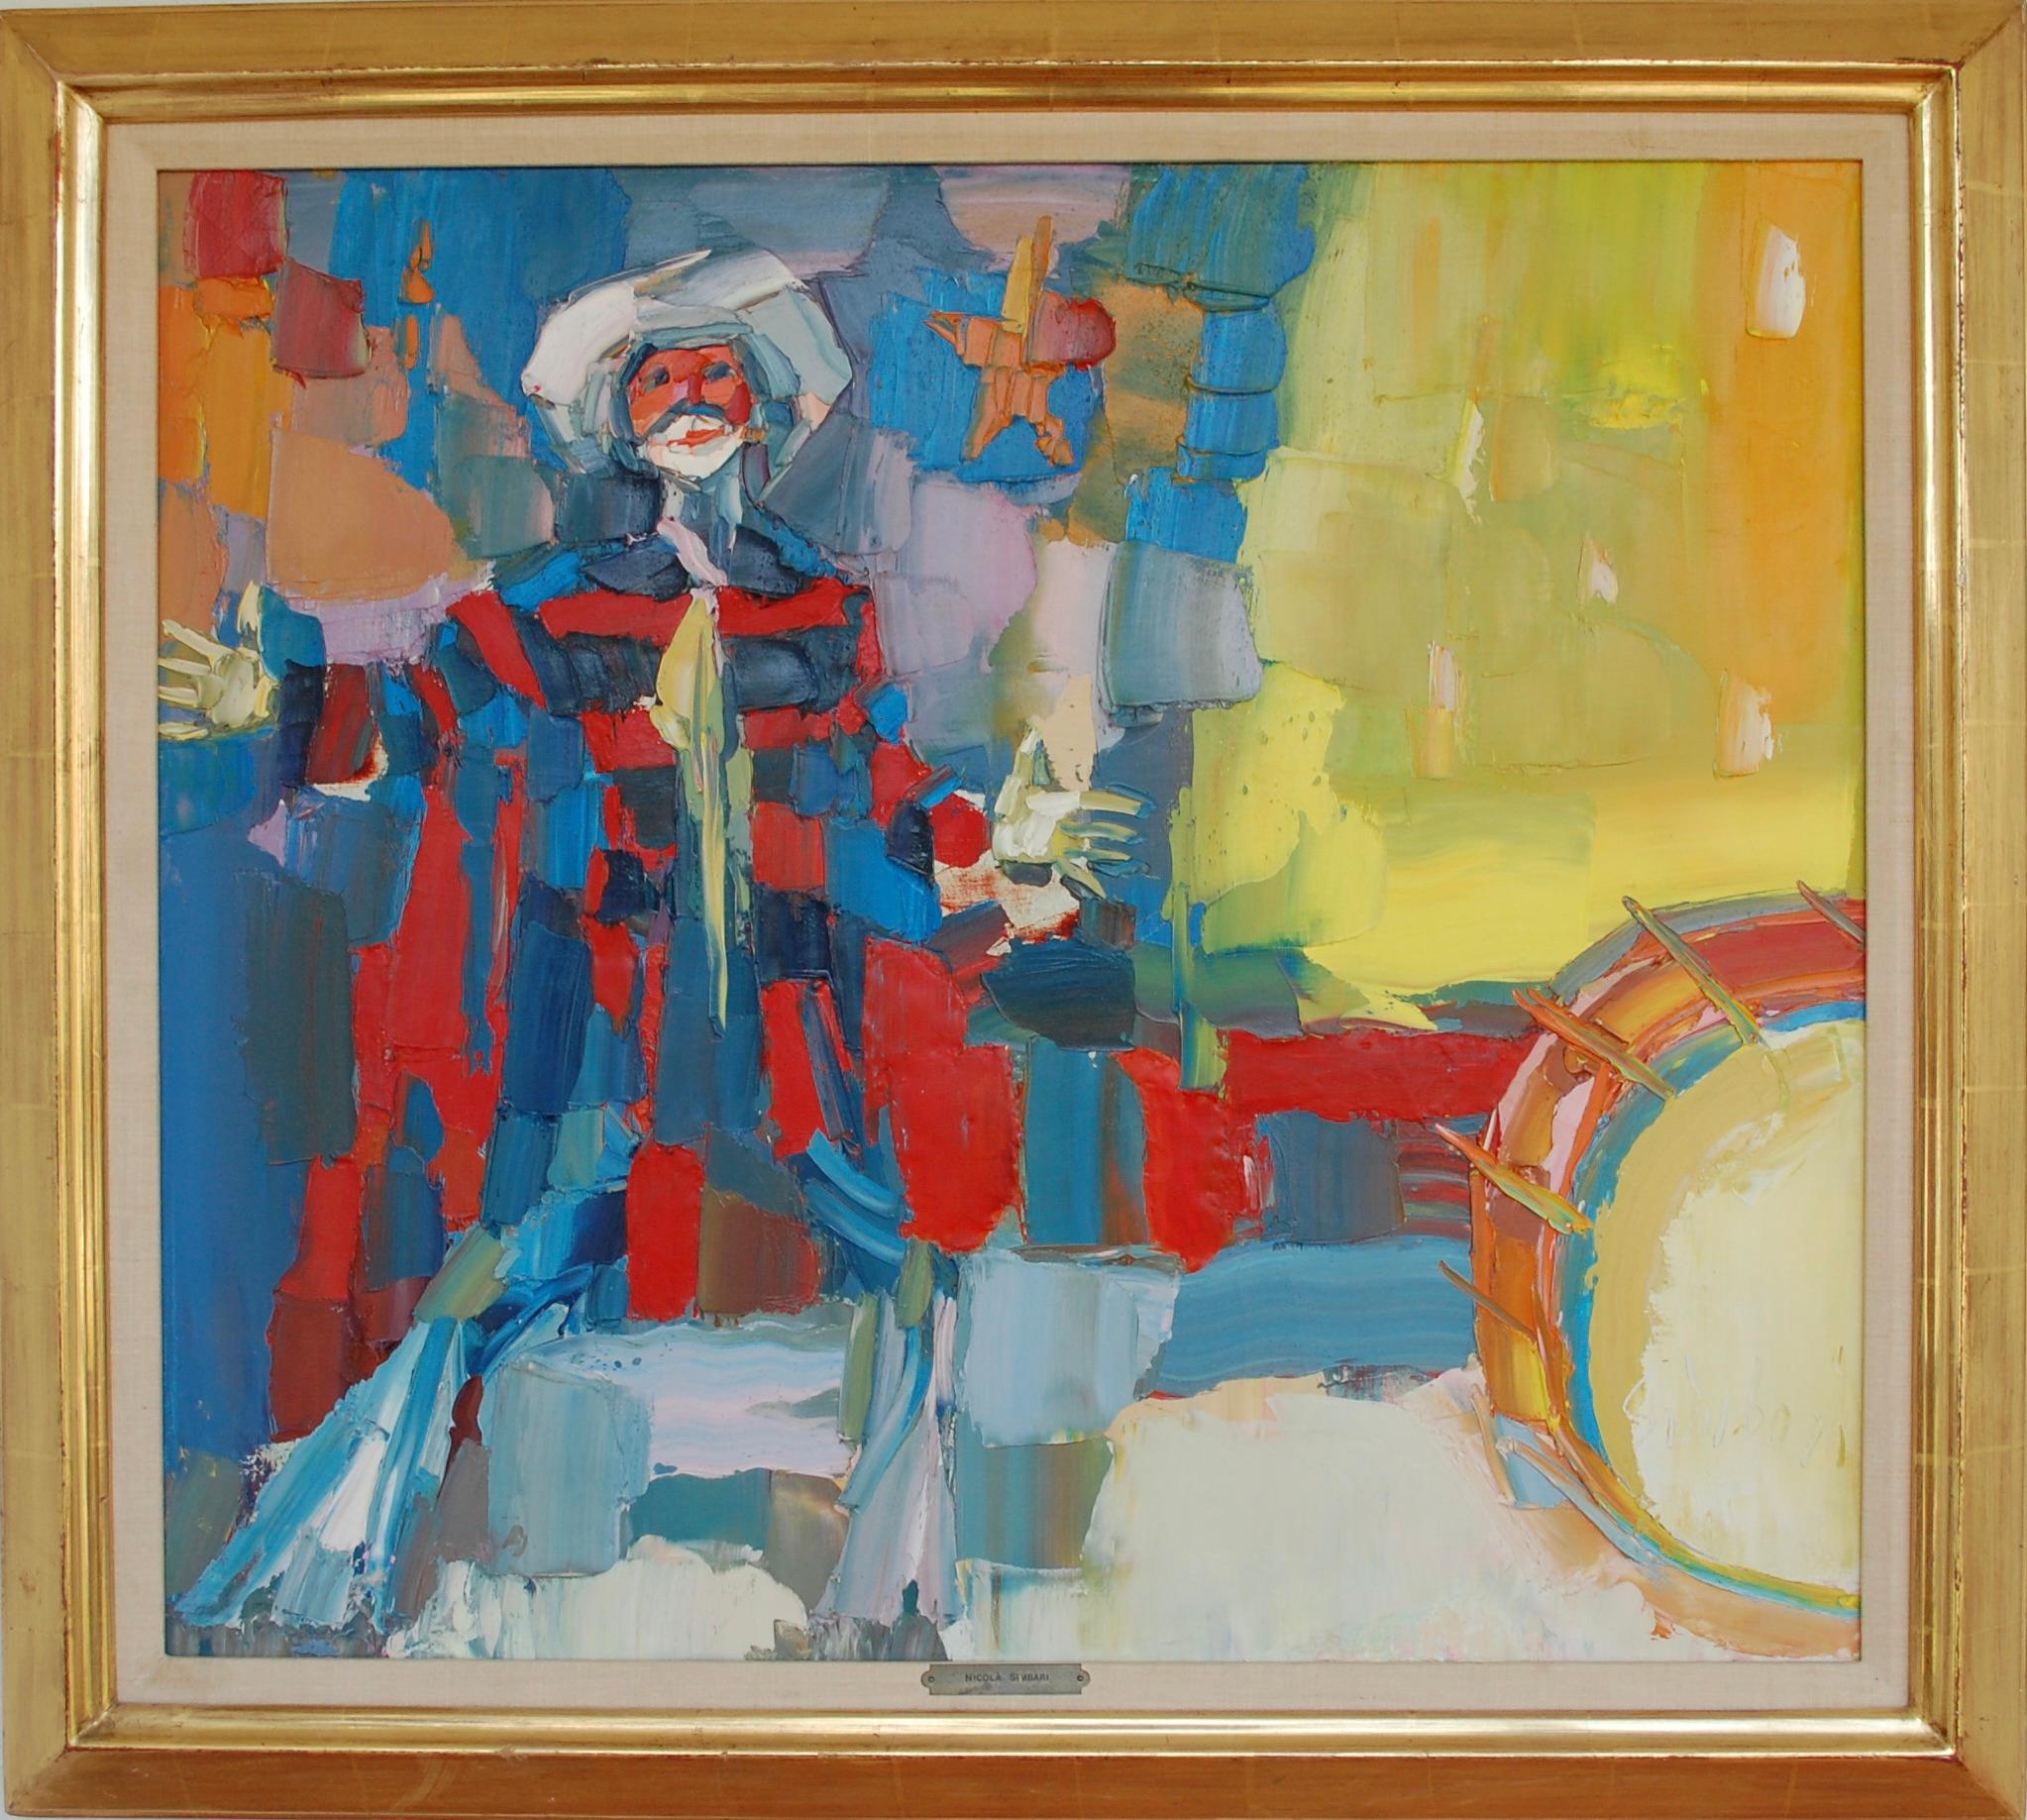 Performer
Artist signed lower right, canvas 28"x31"75
Nicola Simbari was born in Italy and grow up in Rome. He studied at the Accademia di Belle Arti di Roma, and in the 1940s he began devoting himself to painting in a studio at Via del Babuino in